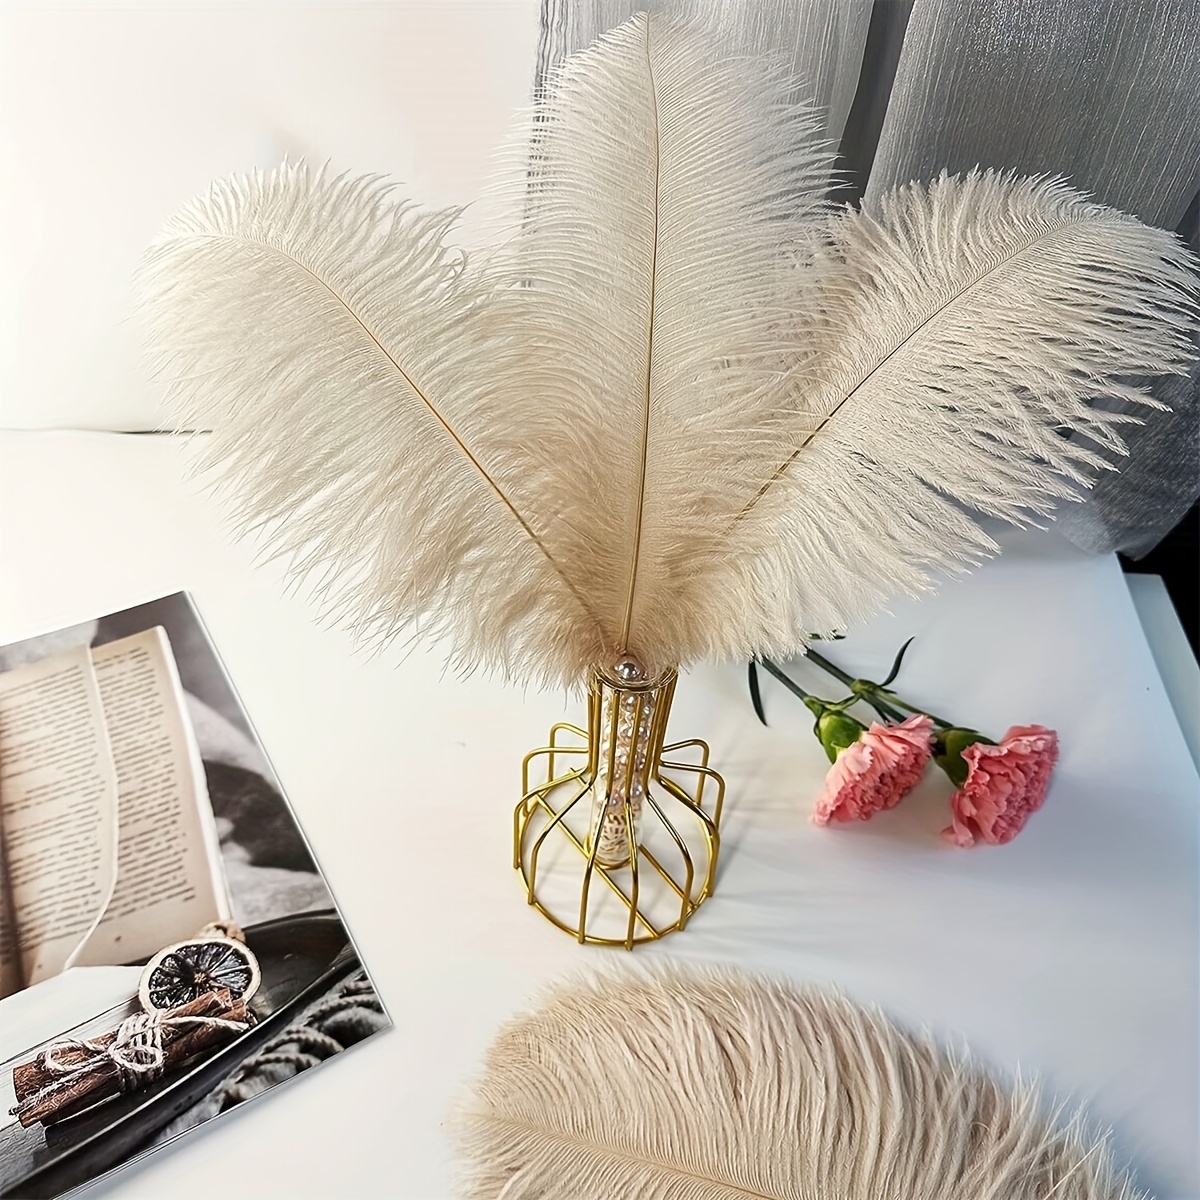 How To Make Gorgeous DIY Ostrich Feather Centerpieces (+ 7